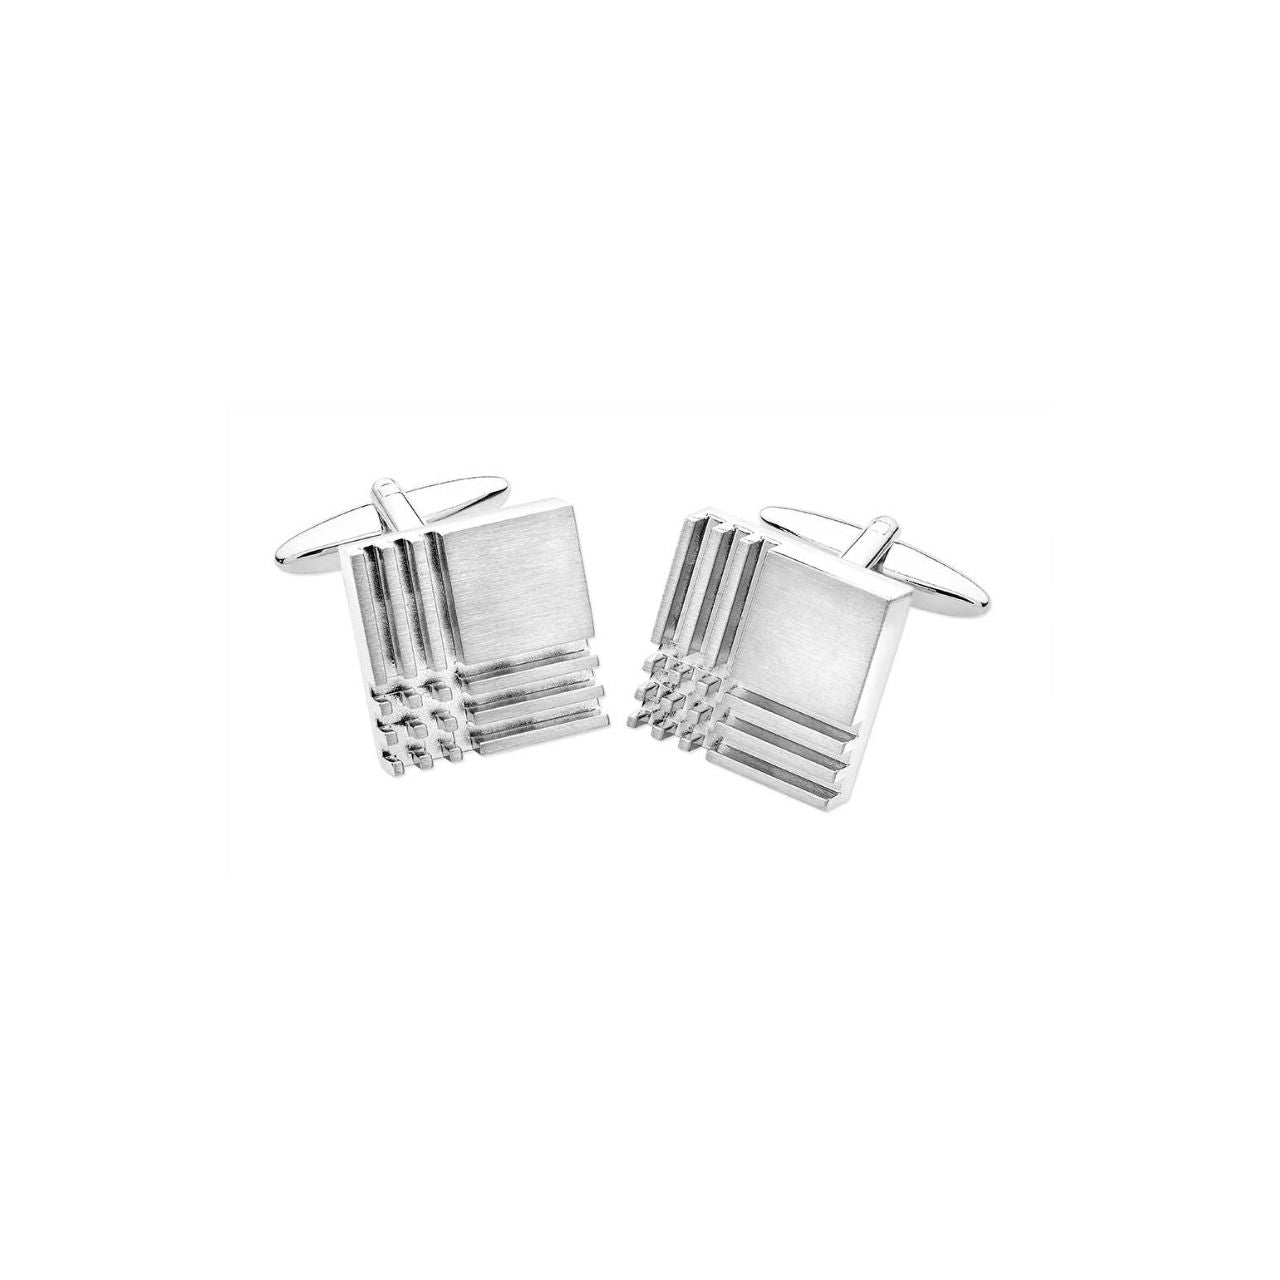 Hatch Cufflinks from Tipperary  This pair of cufflinks comes in a gift box and makes a great gift for fathers, brothers, colleagues and friends for all occasions. Also a great gift for grooms and groomsmen.